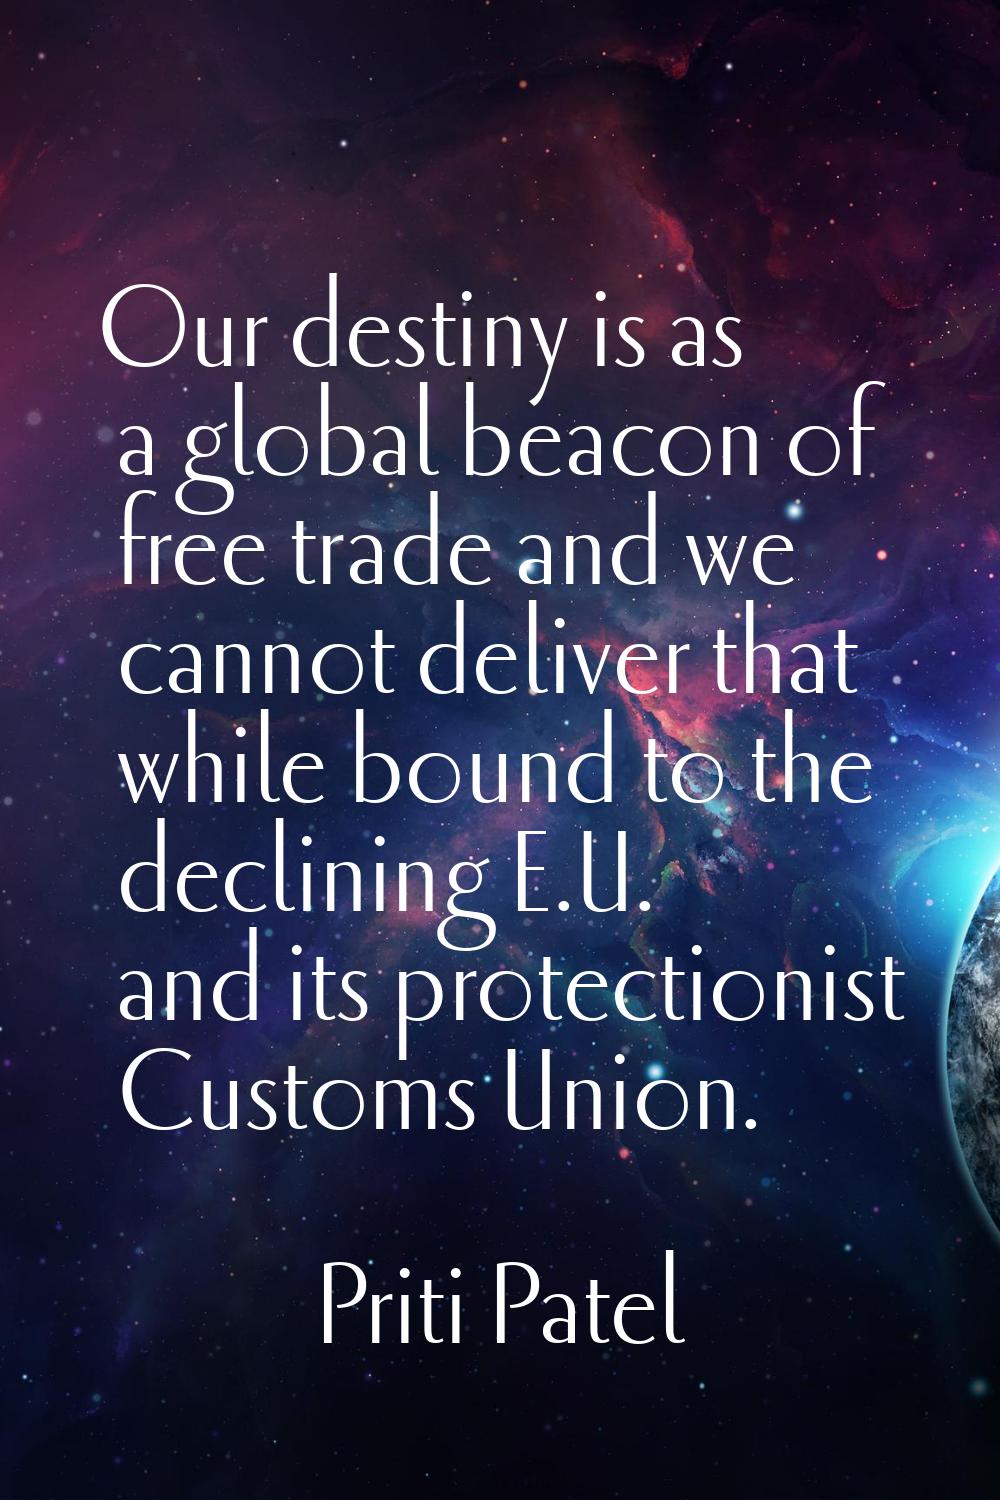 Our destiny is as a global beacon of free trade and we cannot deliver that while bound to the decli